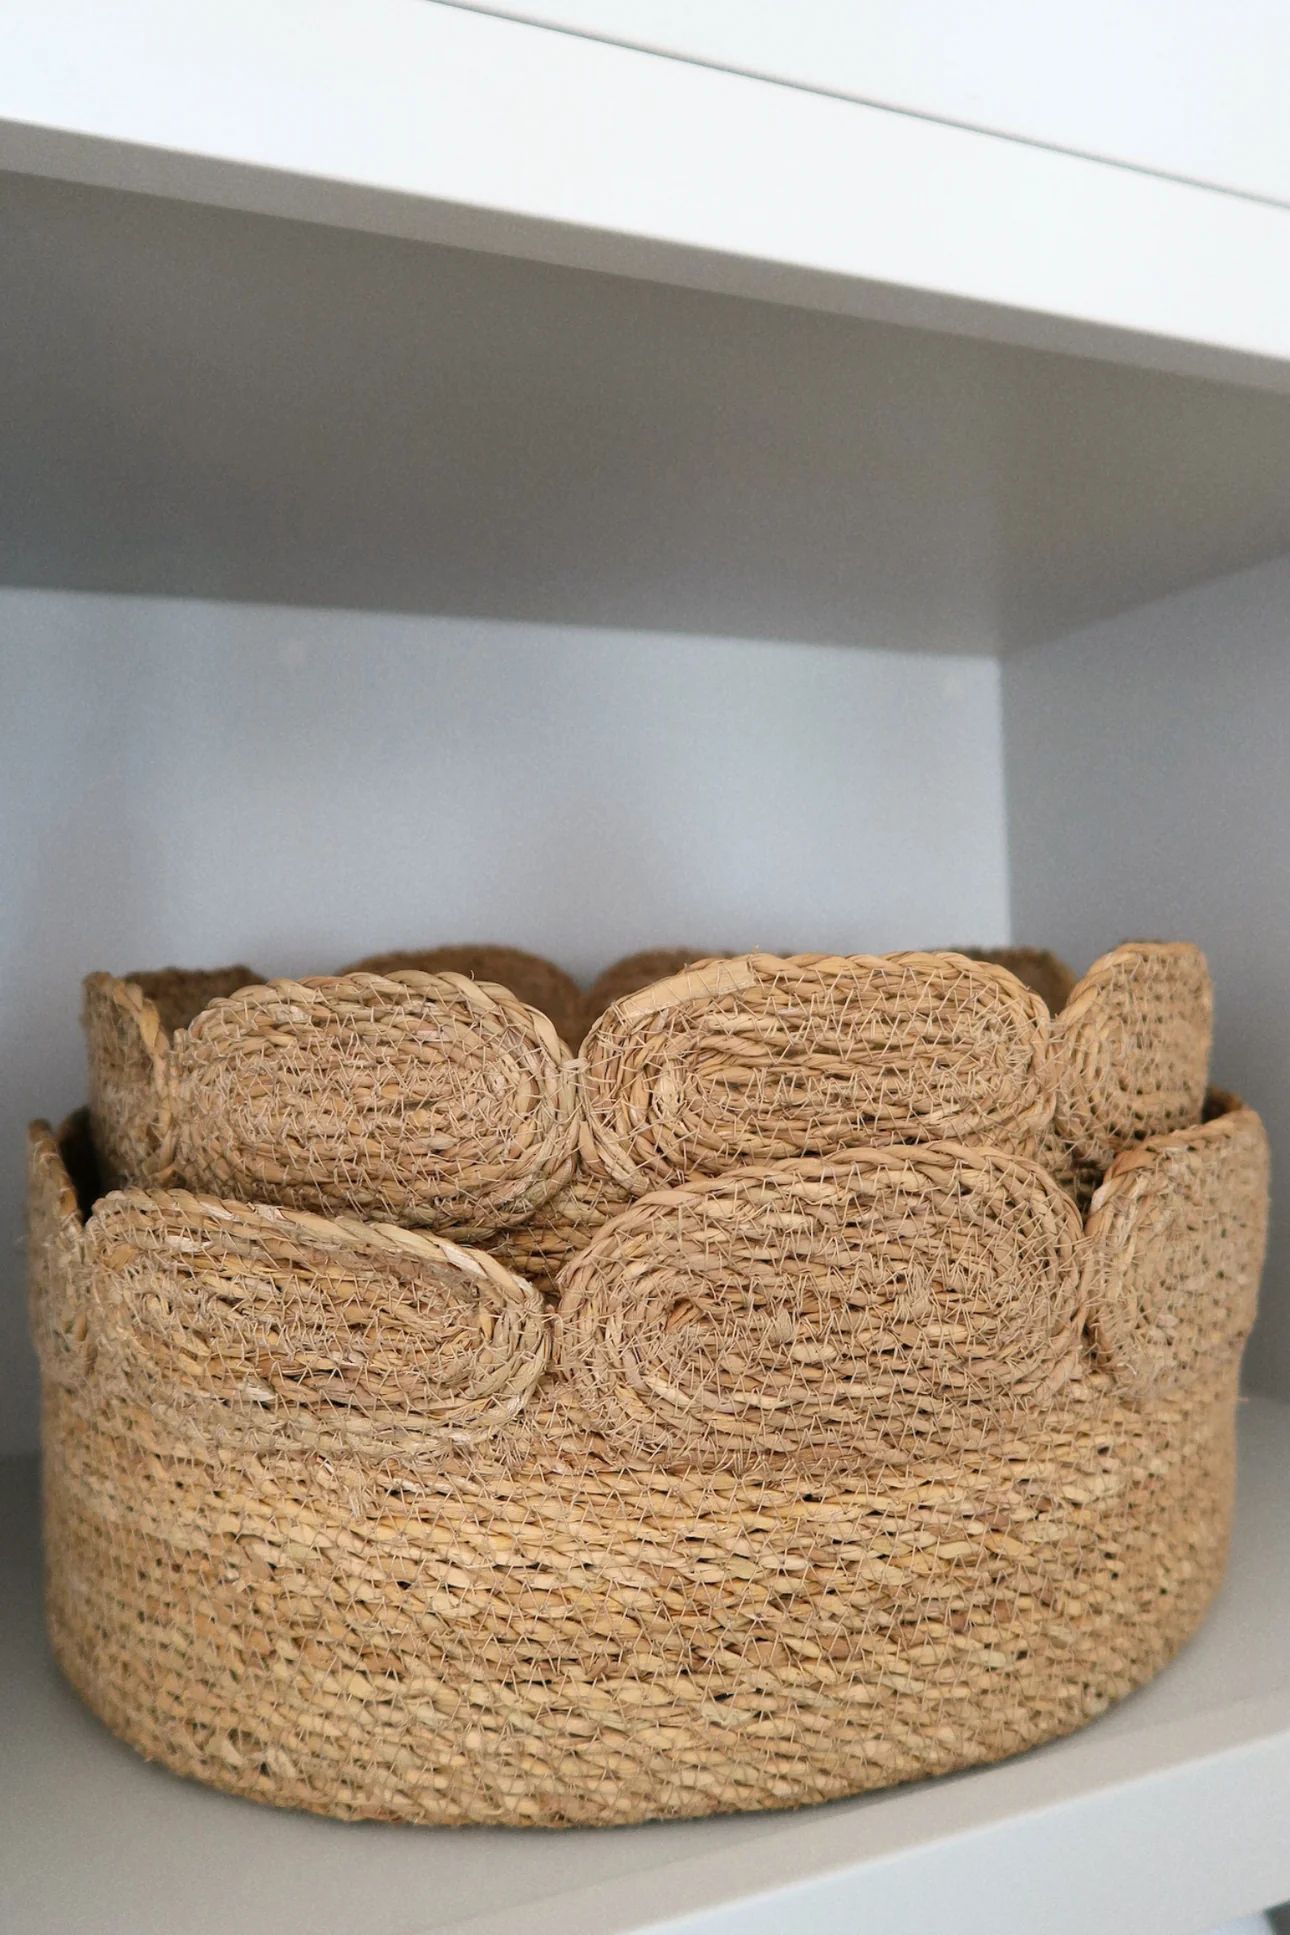 Full Bloom Scallop Basket - 2 Sizes | THELIFESTYLEDCO